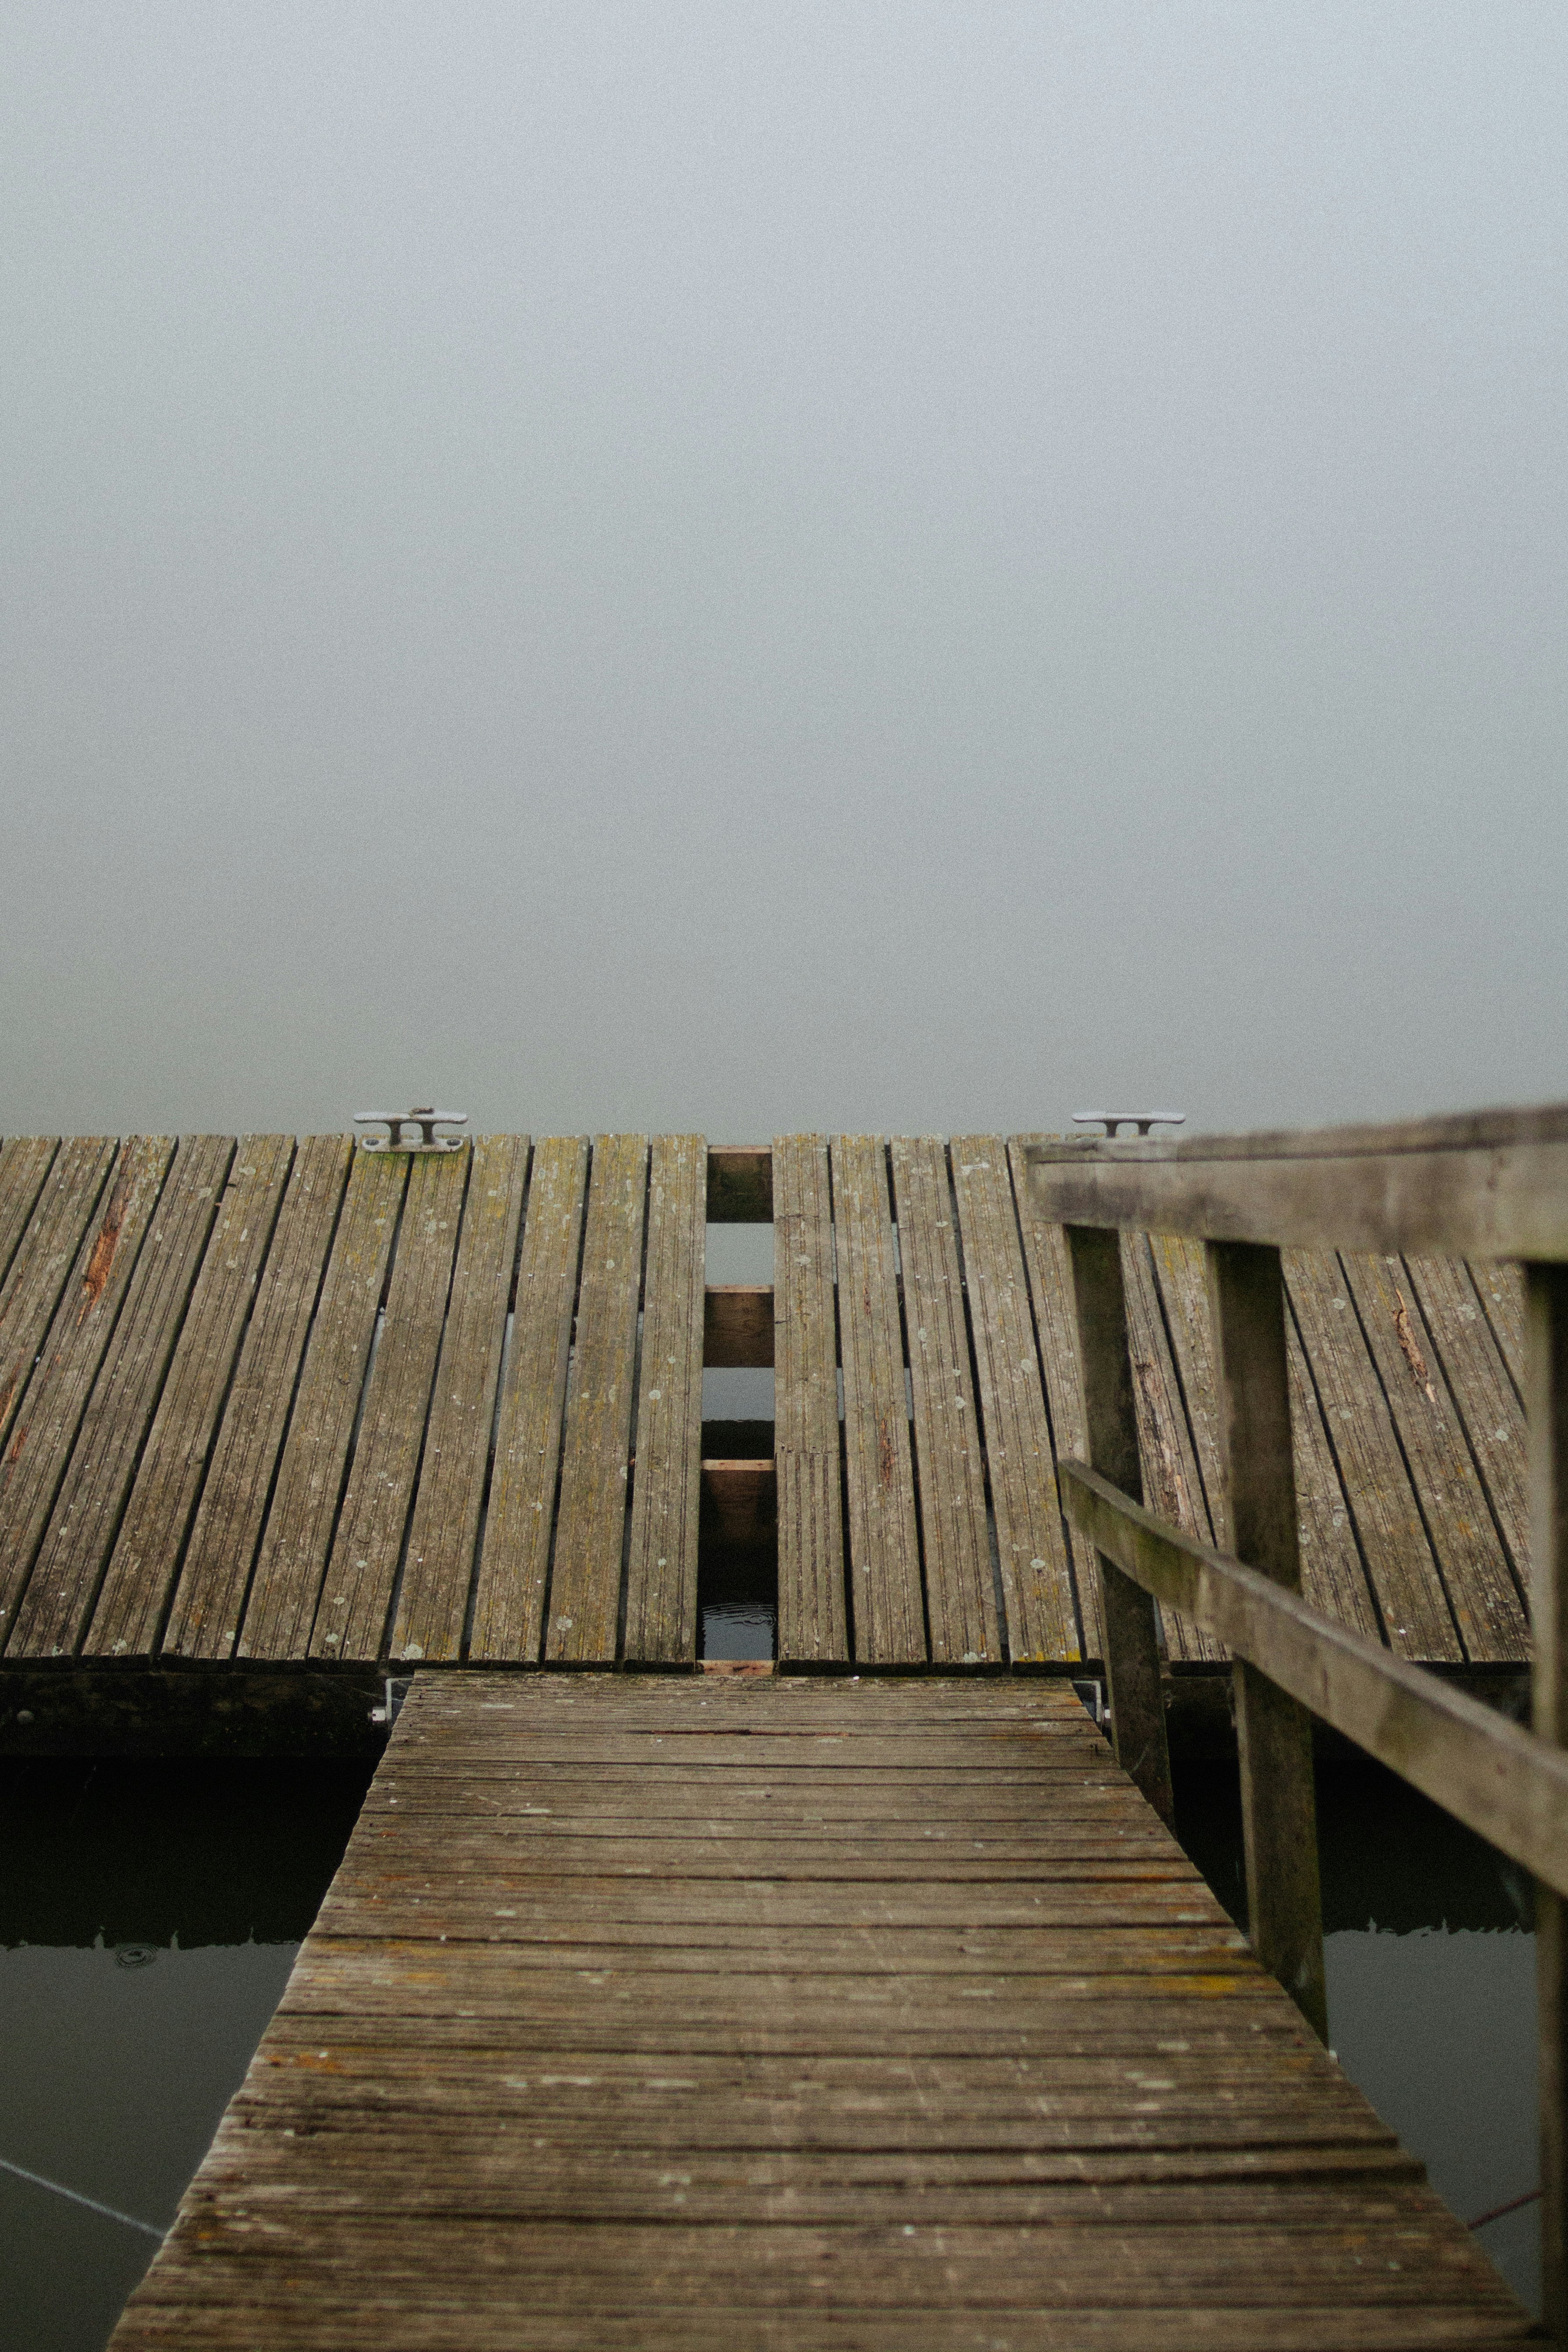 brown wooden dock on body of water